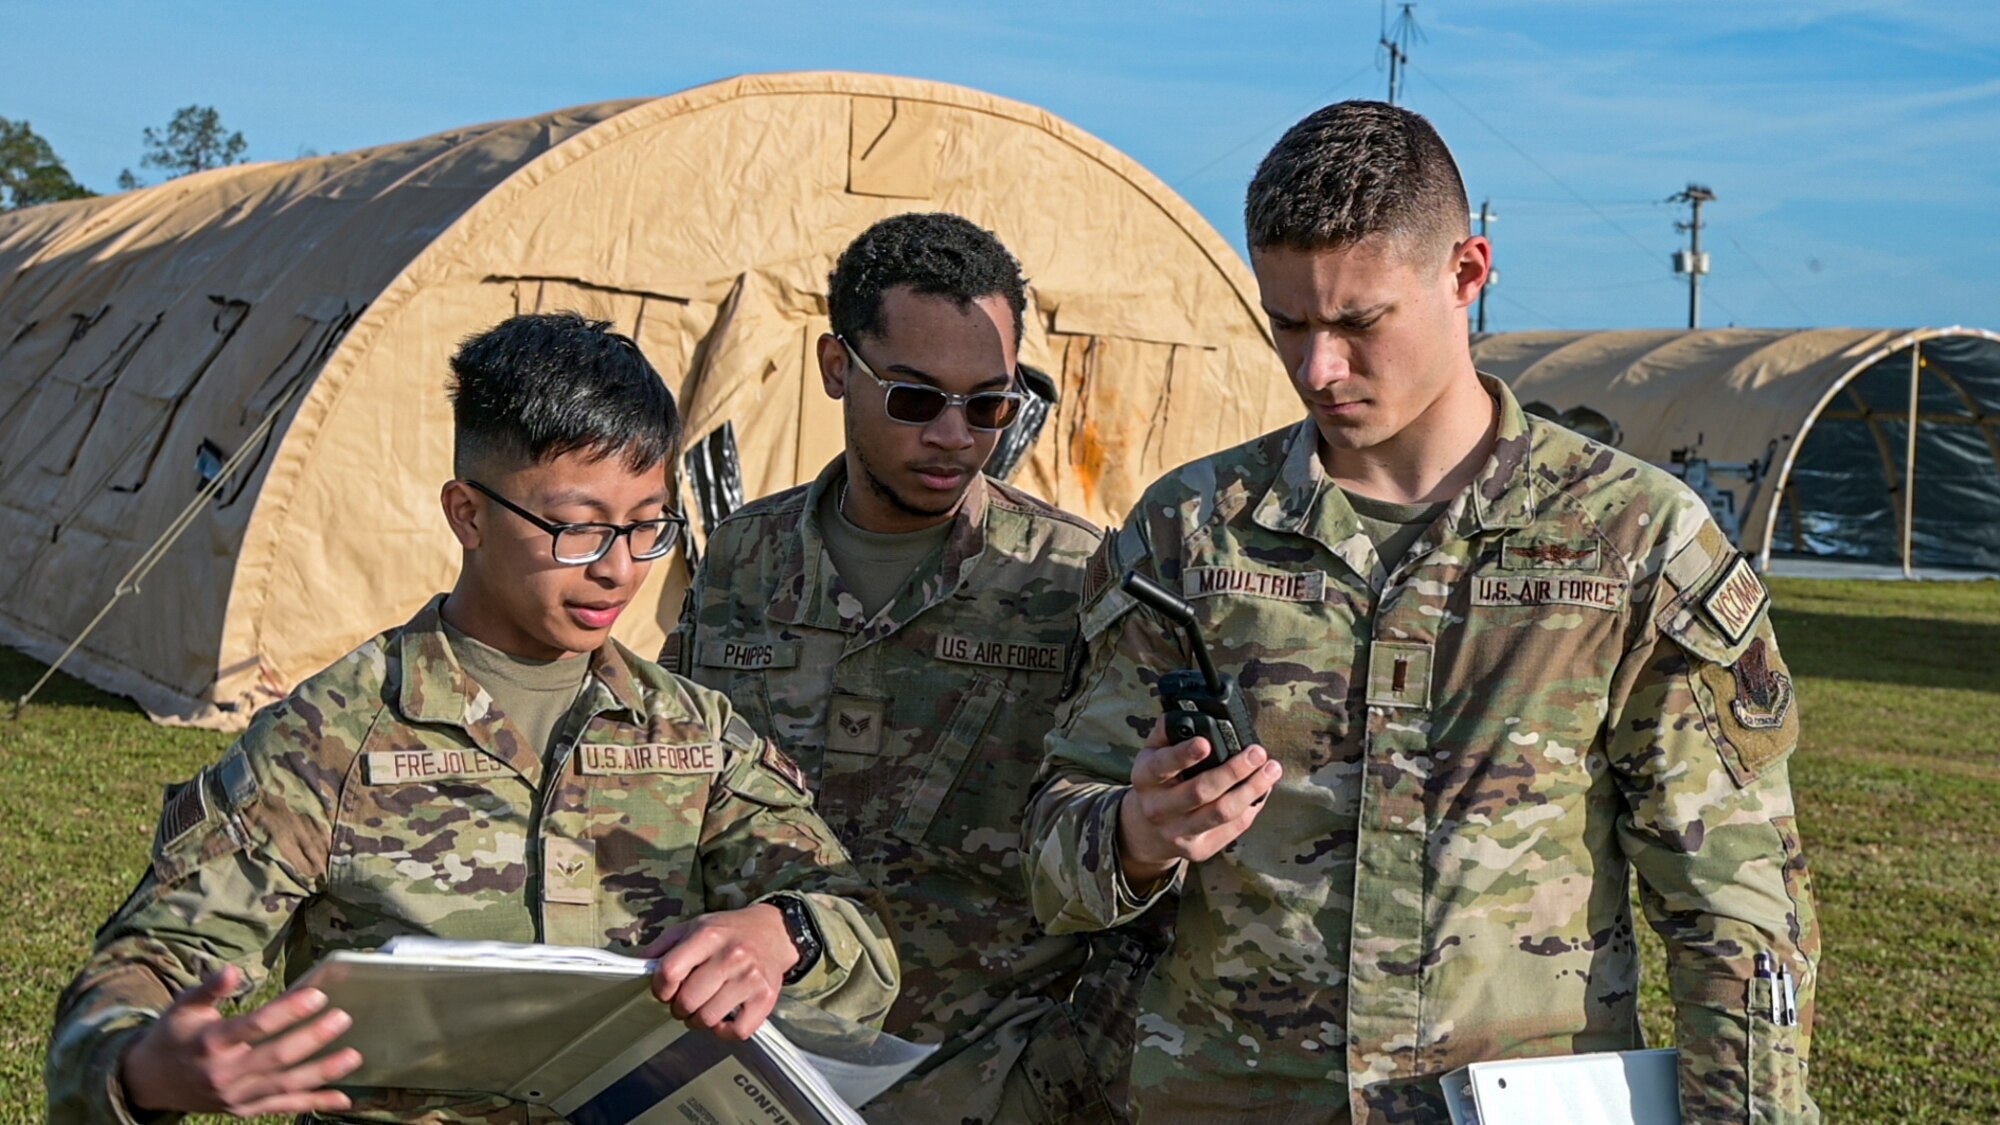 U.S. Air Force Airman Randy Frejoles, left, 23rd Communications Squadron radio frequency operator, Senior Airman Devante Phipps, middle, 23rd CS radio supervisor, and 2nd Lt. Jake Moultrie, 23rd CS radio officer in charge, test connectivity at Avon Park Air Force Range, Florida, April 9, 2024. The ability to establish communications is crucial to successfully establishing a forward operating site in a contingency location. The Ready Tiger 24-1 exercise evaluators will assess the 23rd Wing's proficiency in employing decentralized command and control to fulfill air tasking orders across geographically dispersed areas amid communication challenges. (U.S. Air Force photo by Airman 1st Class Leonid Soubbotine)